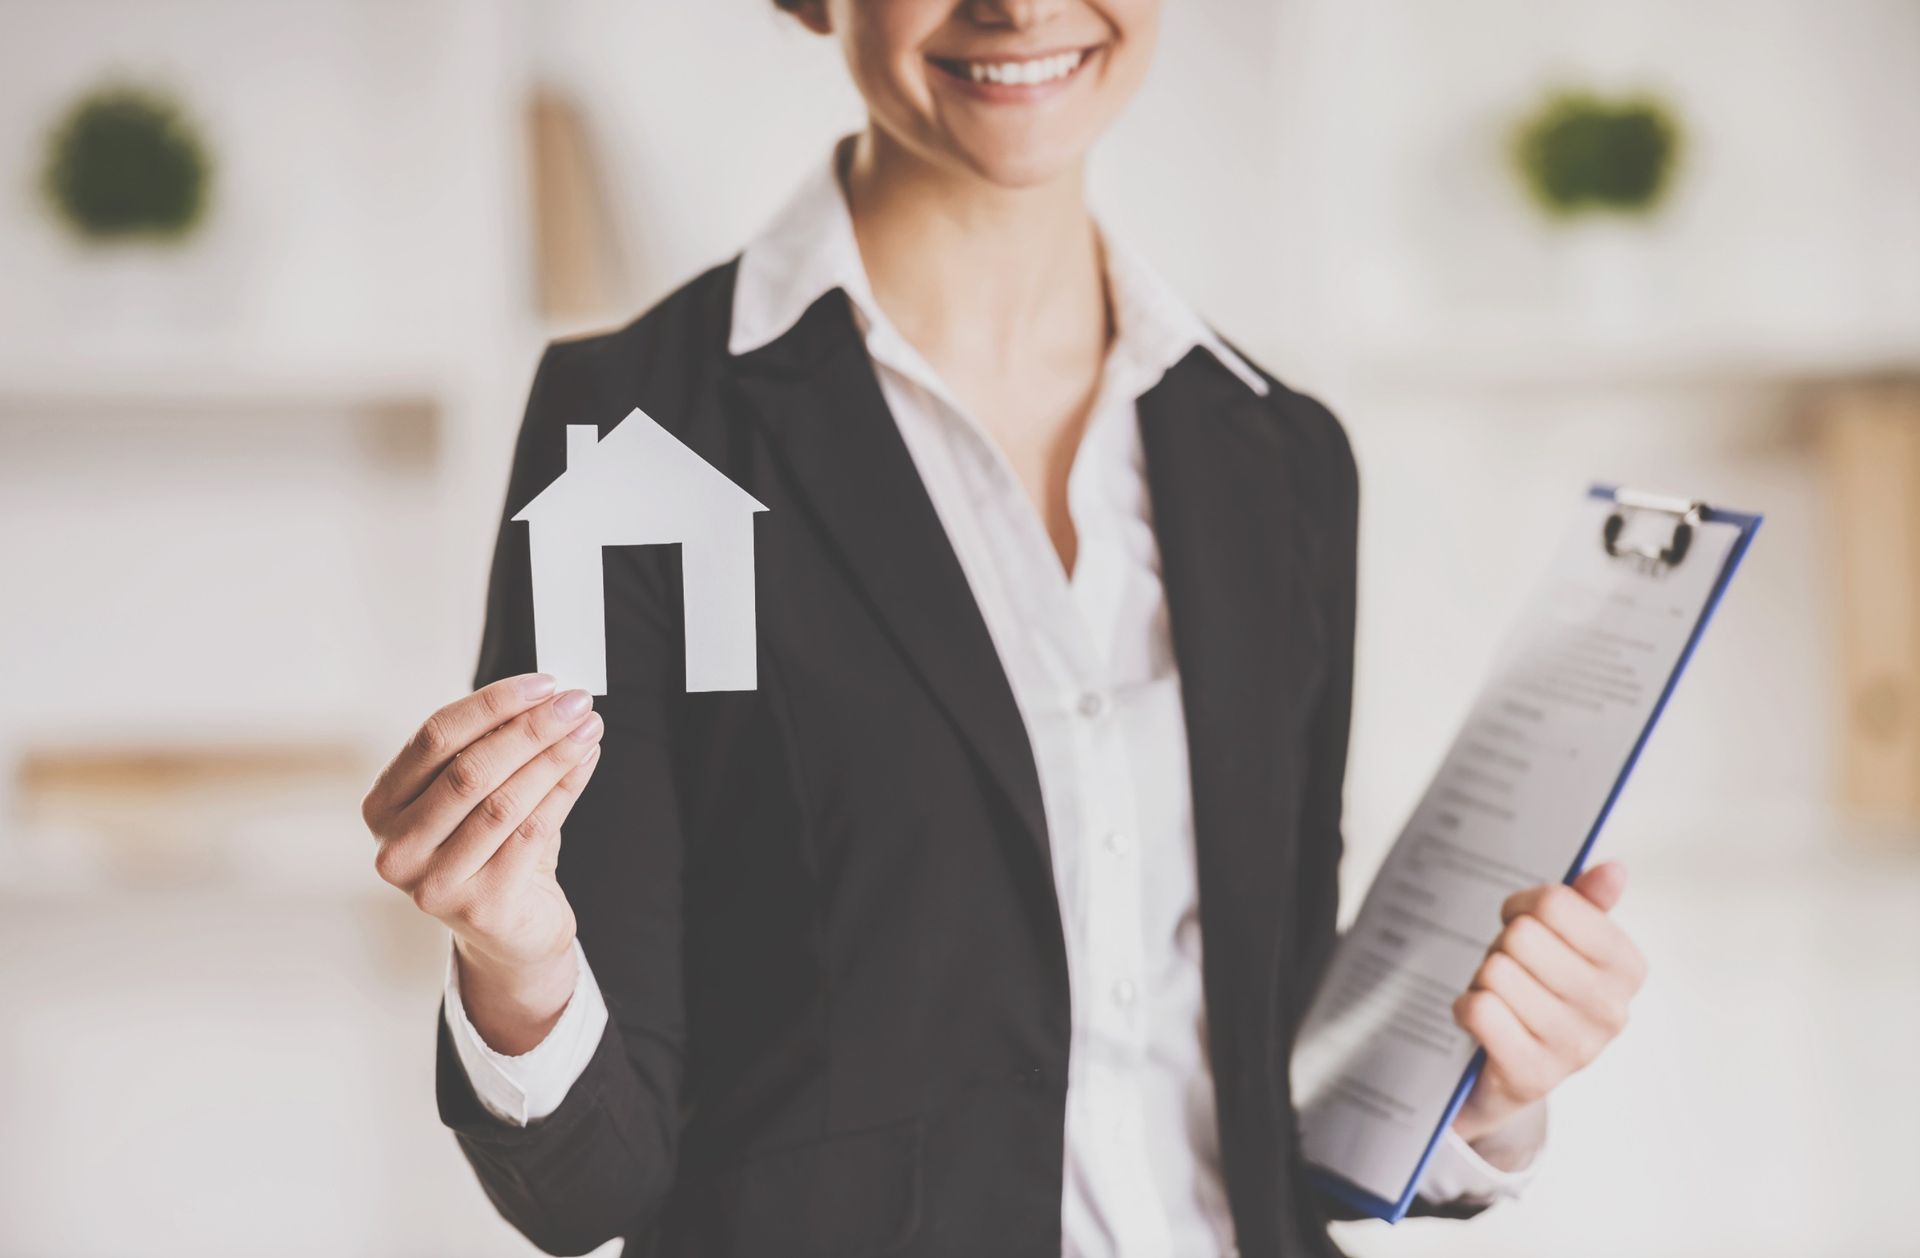 Why Hiring a Professional Property Manager Is Better Than ‘DIY’